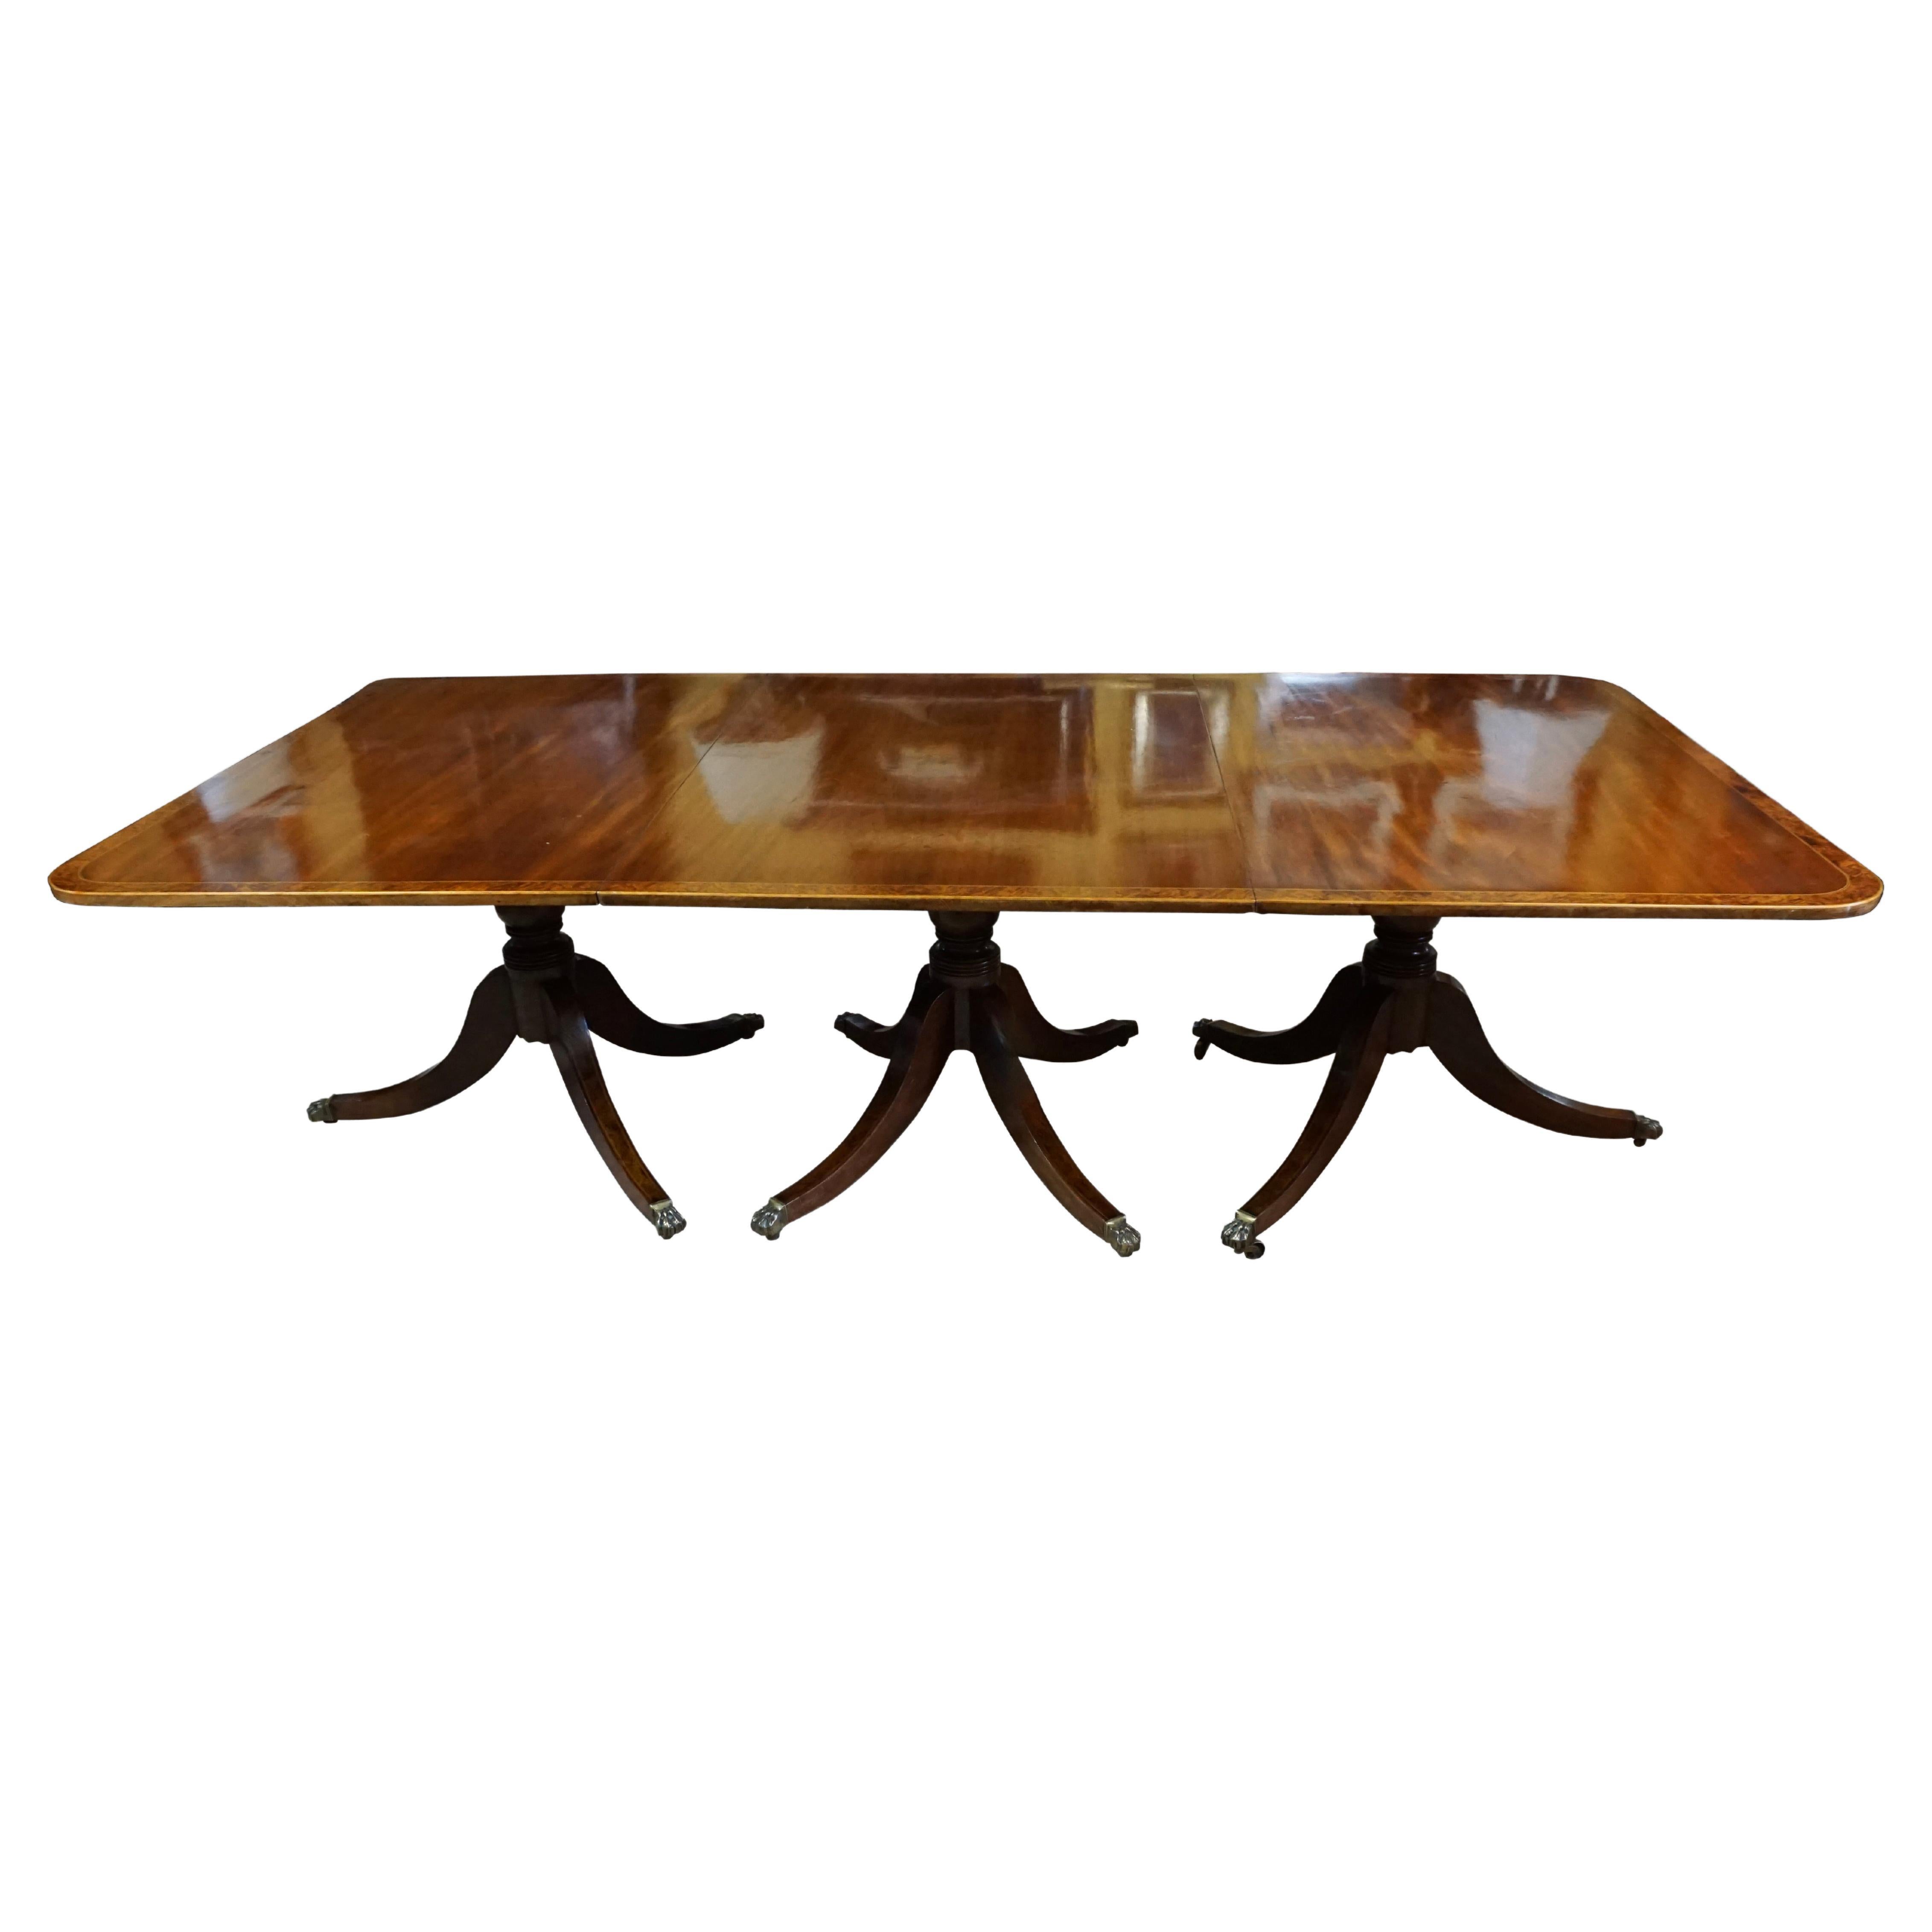 A good quality English inlaid mahogany Georgian style three pedestal dining table retaining its 2 original leafs, the top with elegant burl elm crossbanding finished with boxwood trim and supported on 3 well-turned pedestals with burl elm inlaid